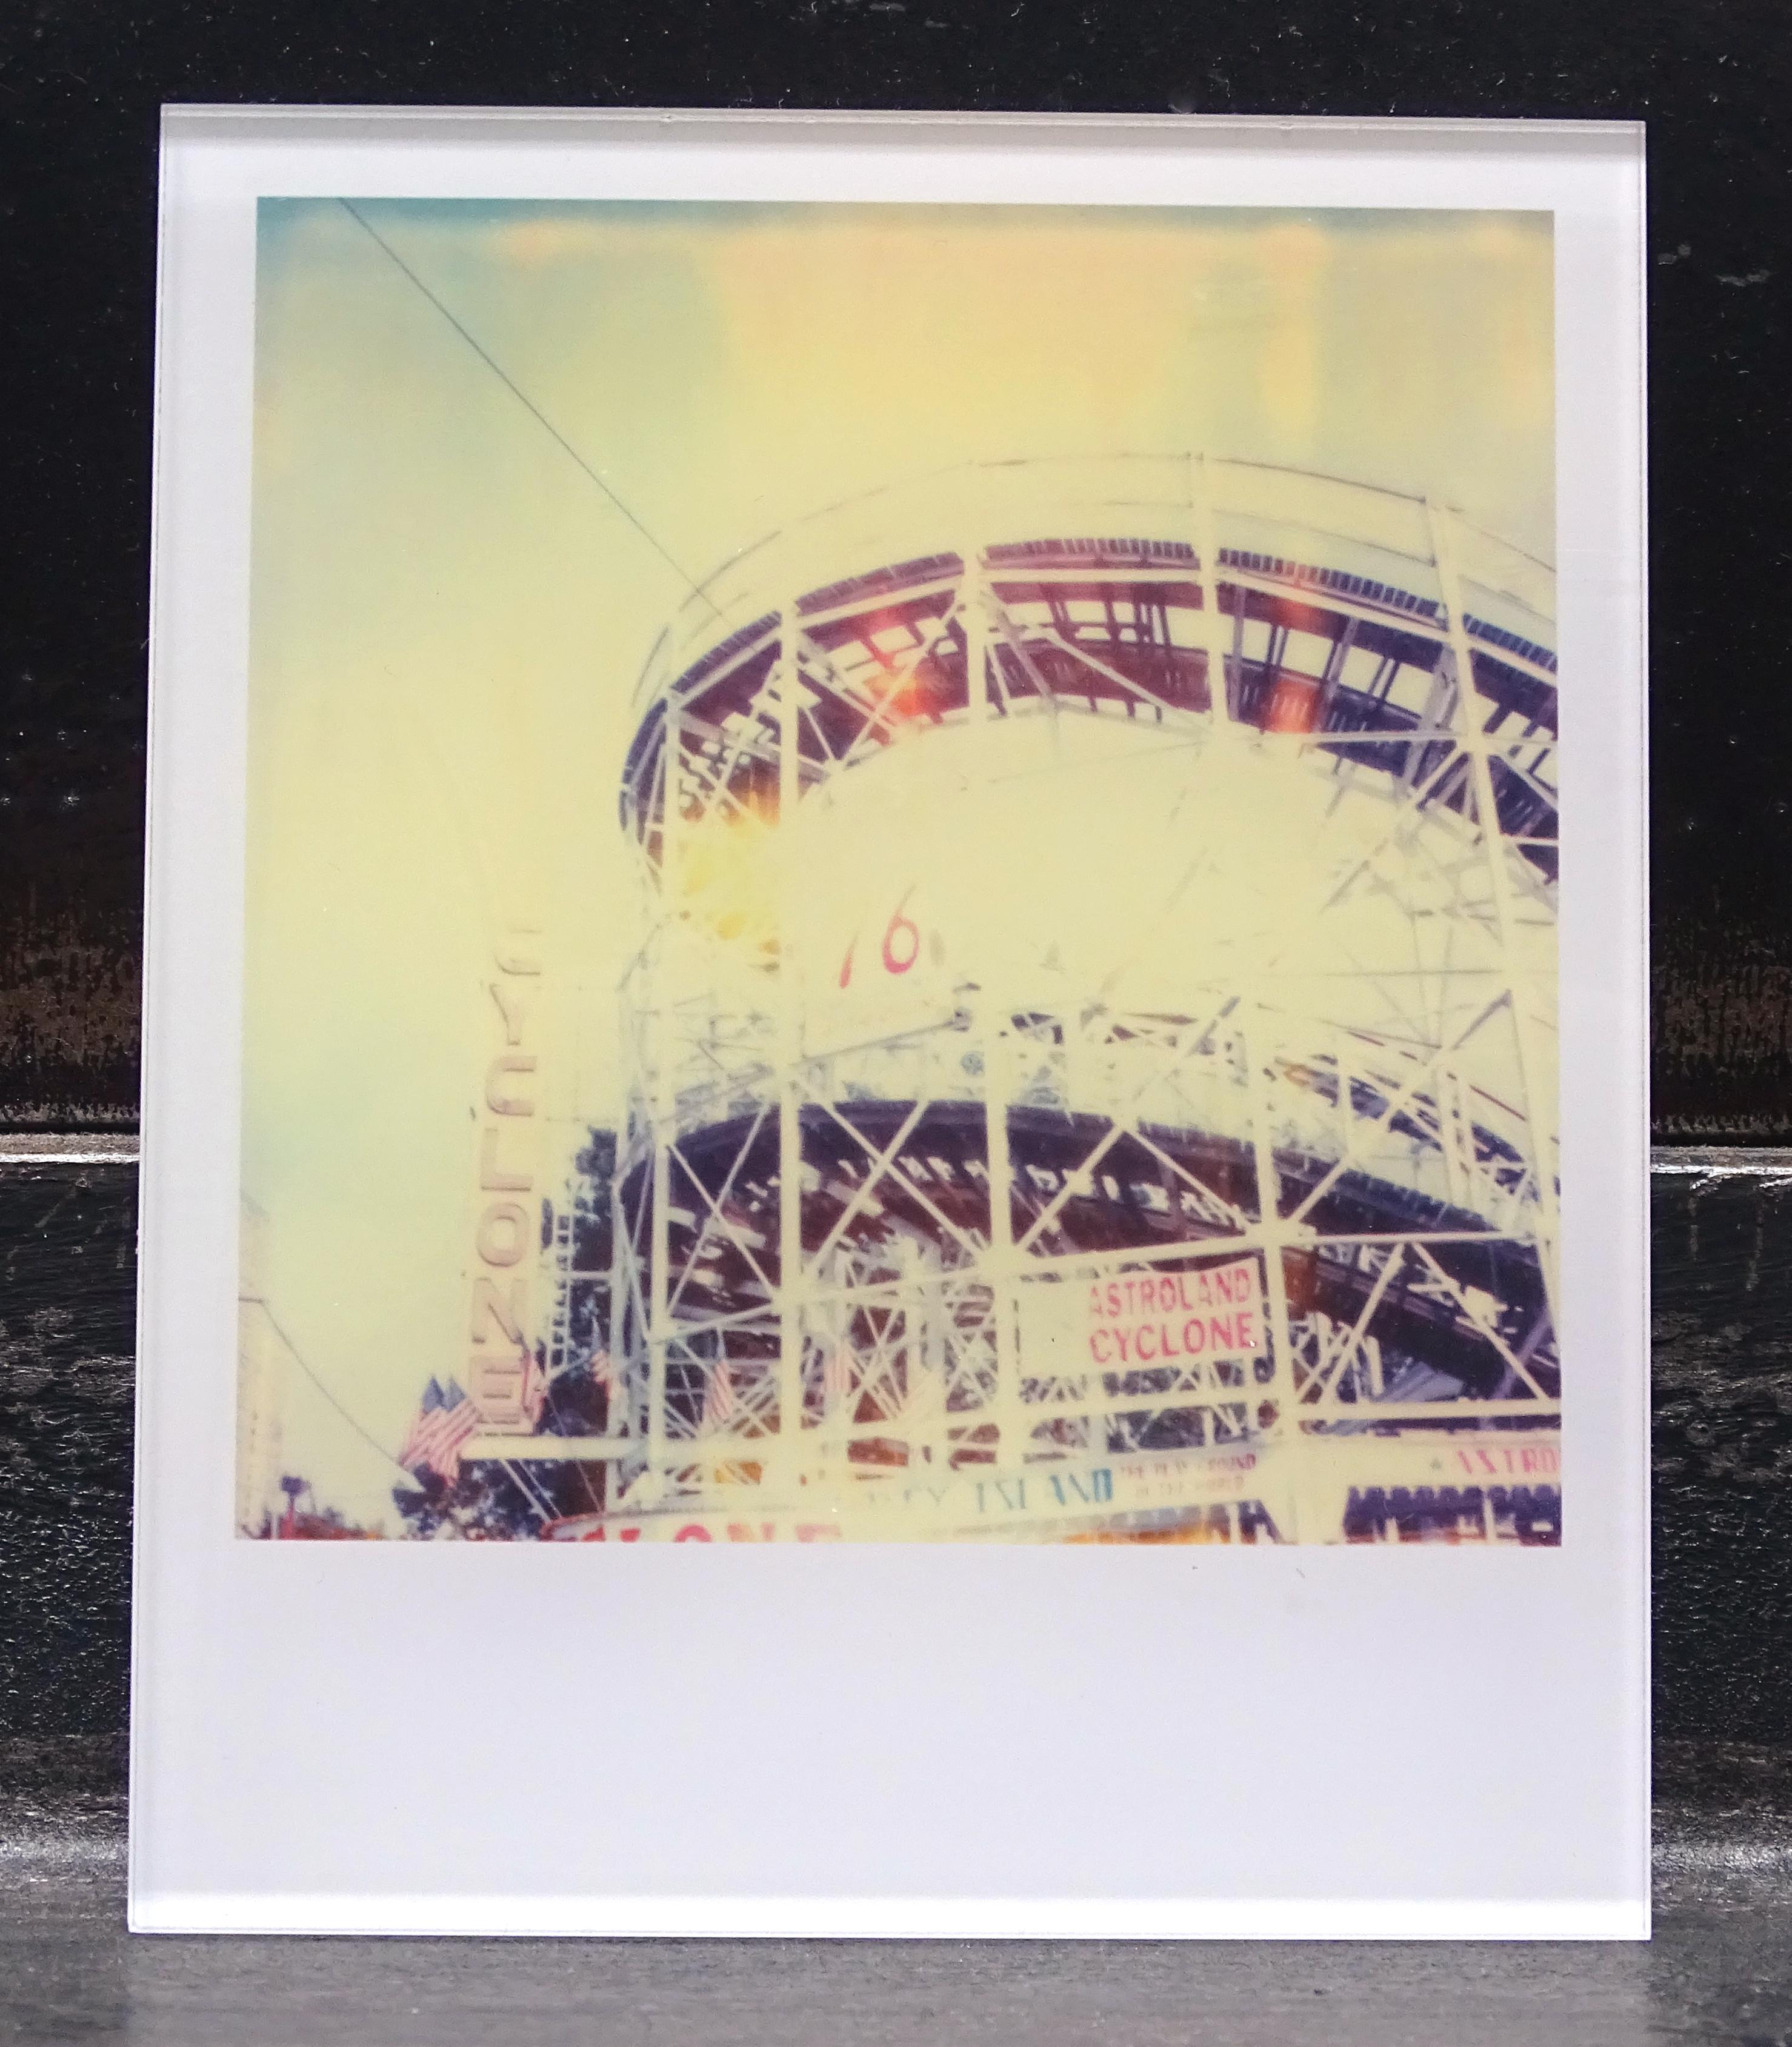 Stefanie Schneider's Minis
Cyclone (Stay), 2006

Signed and signature brand on verso.
Lambda digital Color Photographs based on a Polaroid.
Sandwiched in between Plexiglass (thickness 0.7cm)

from the movie 'Stay' by Marc Forster, featuring Ewan